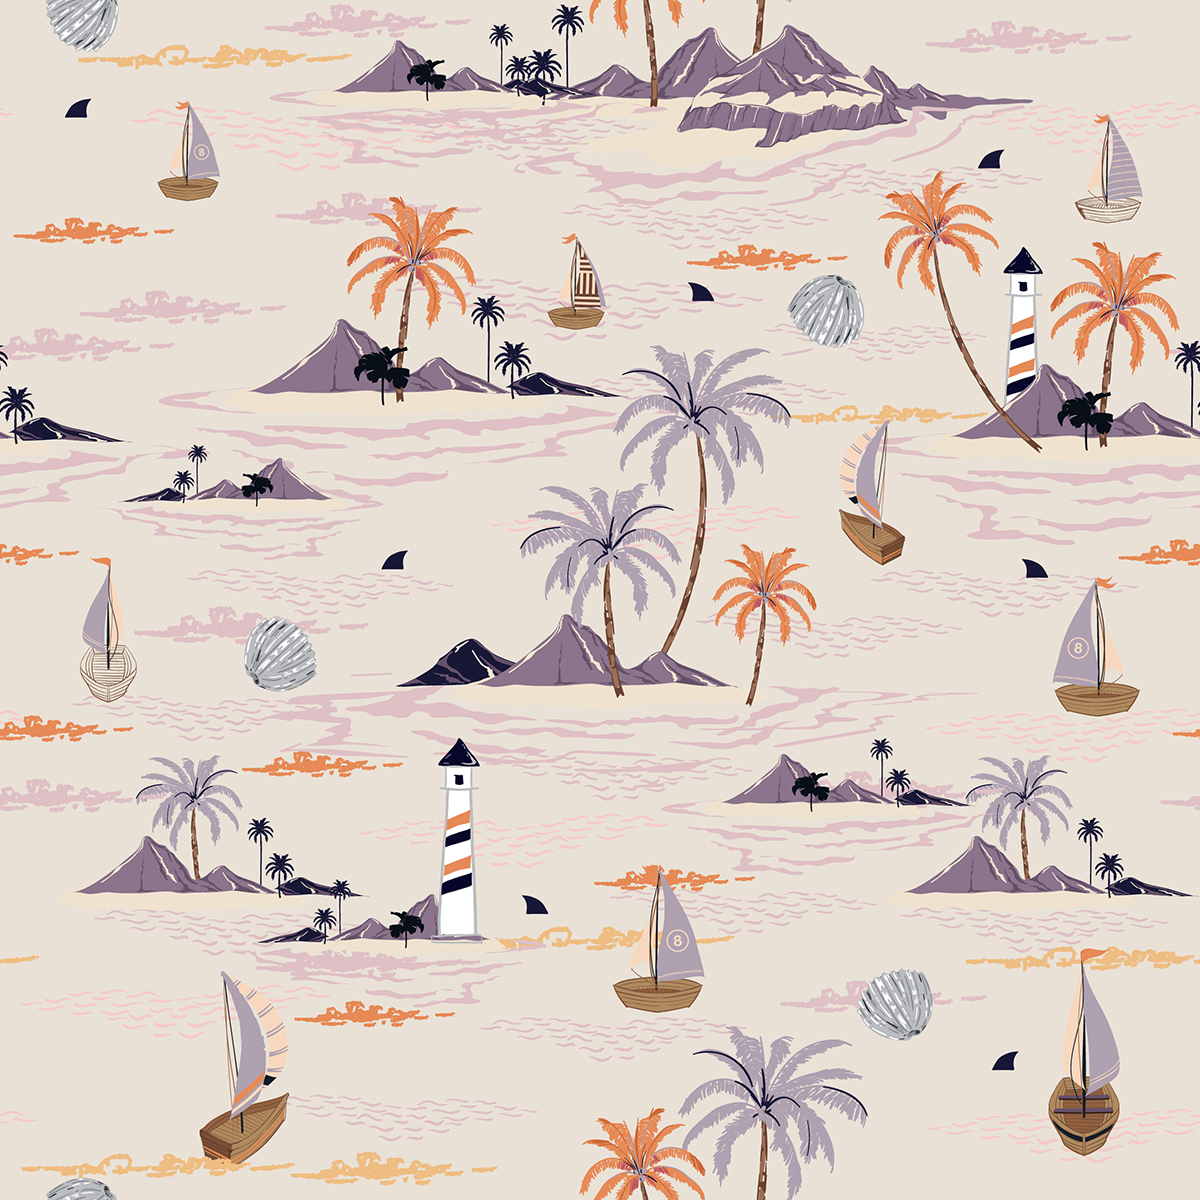 A pattern of boats and palm trees